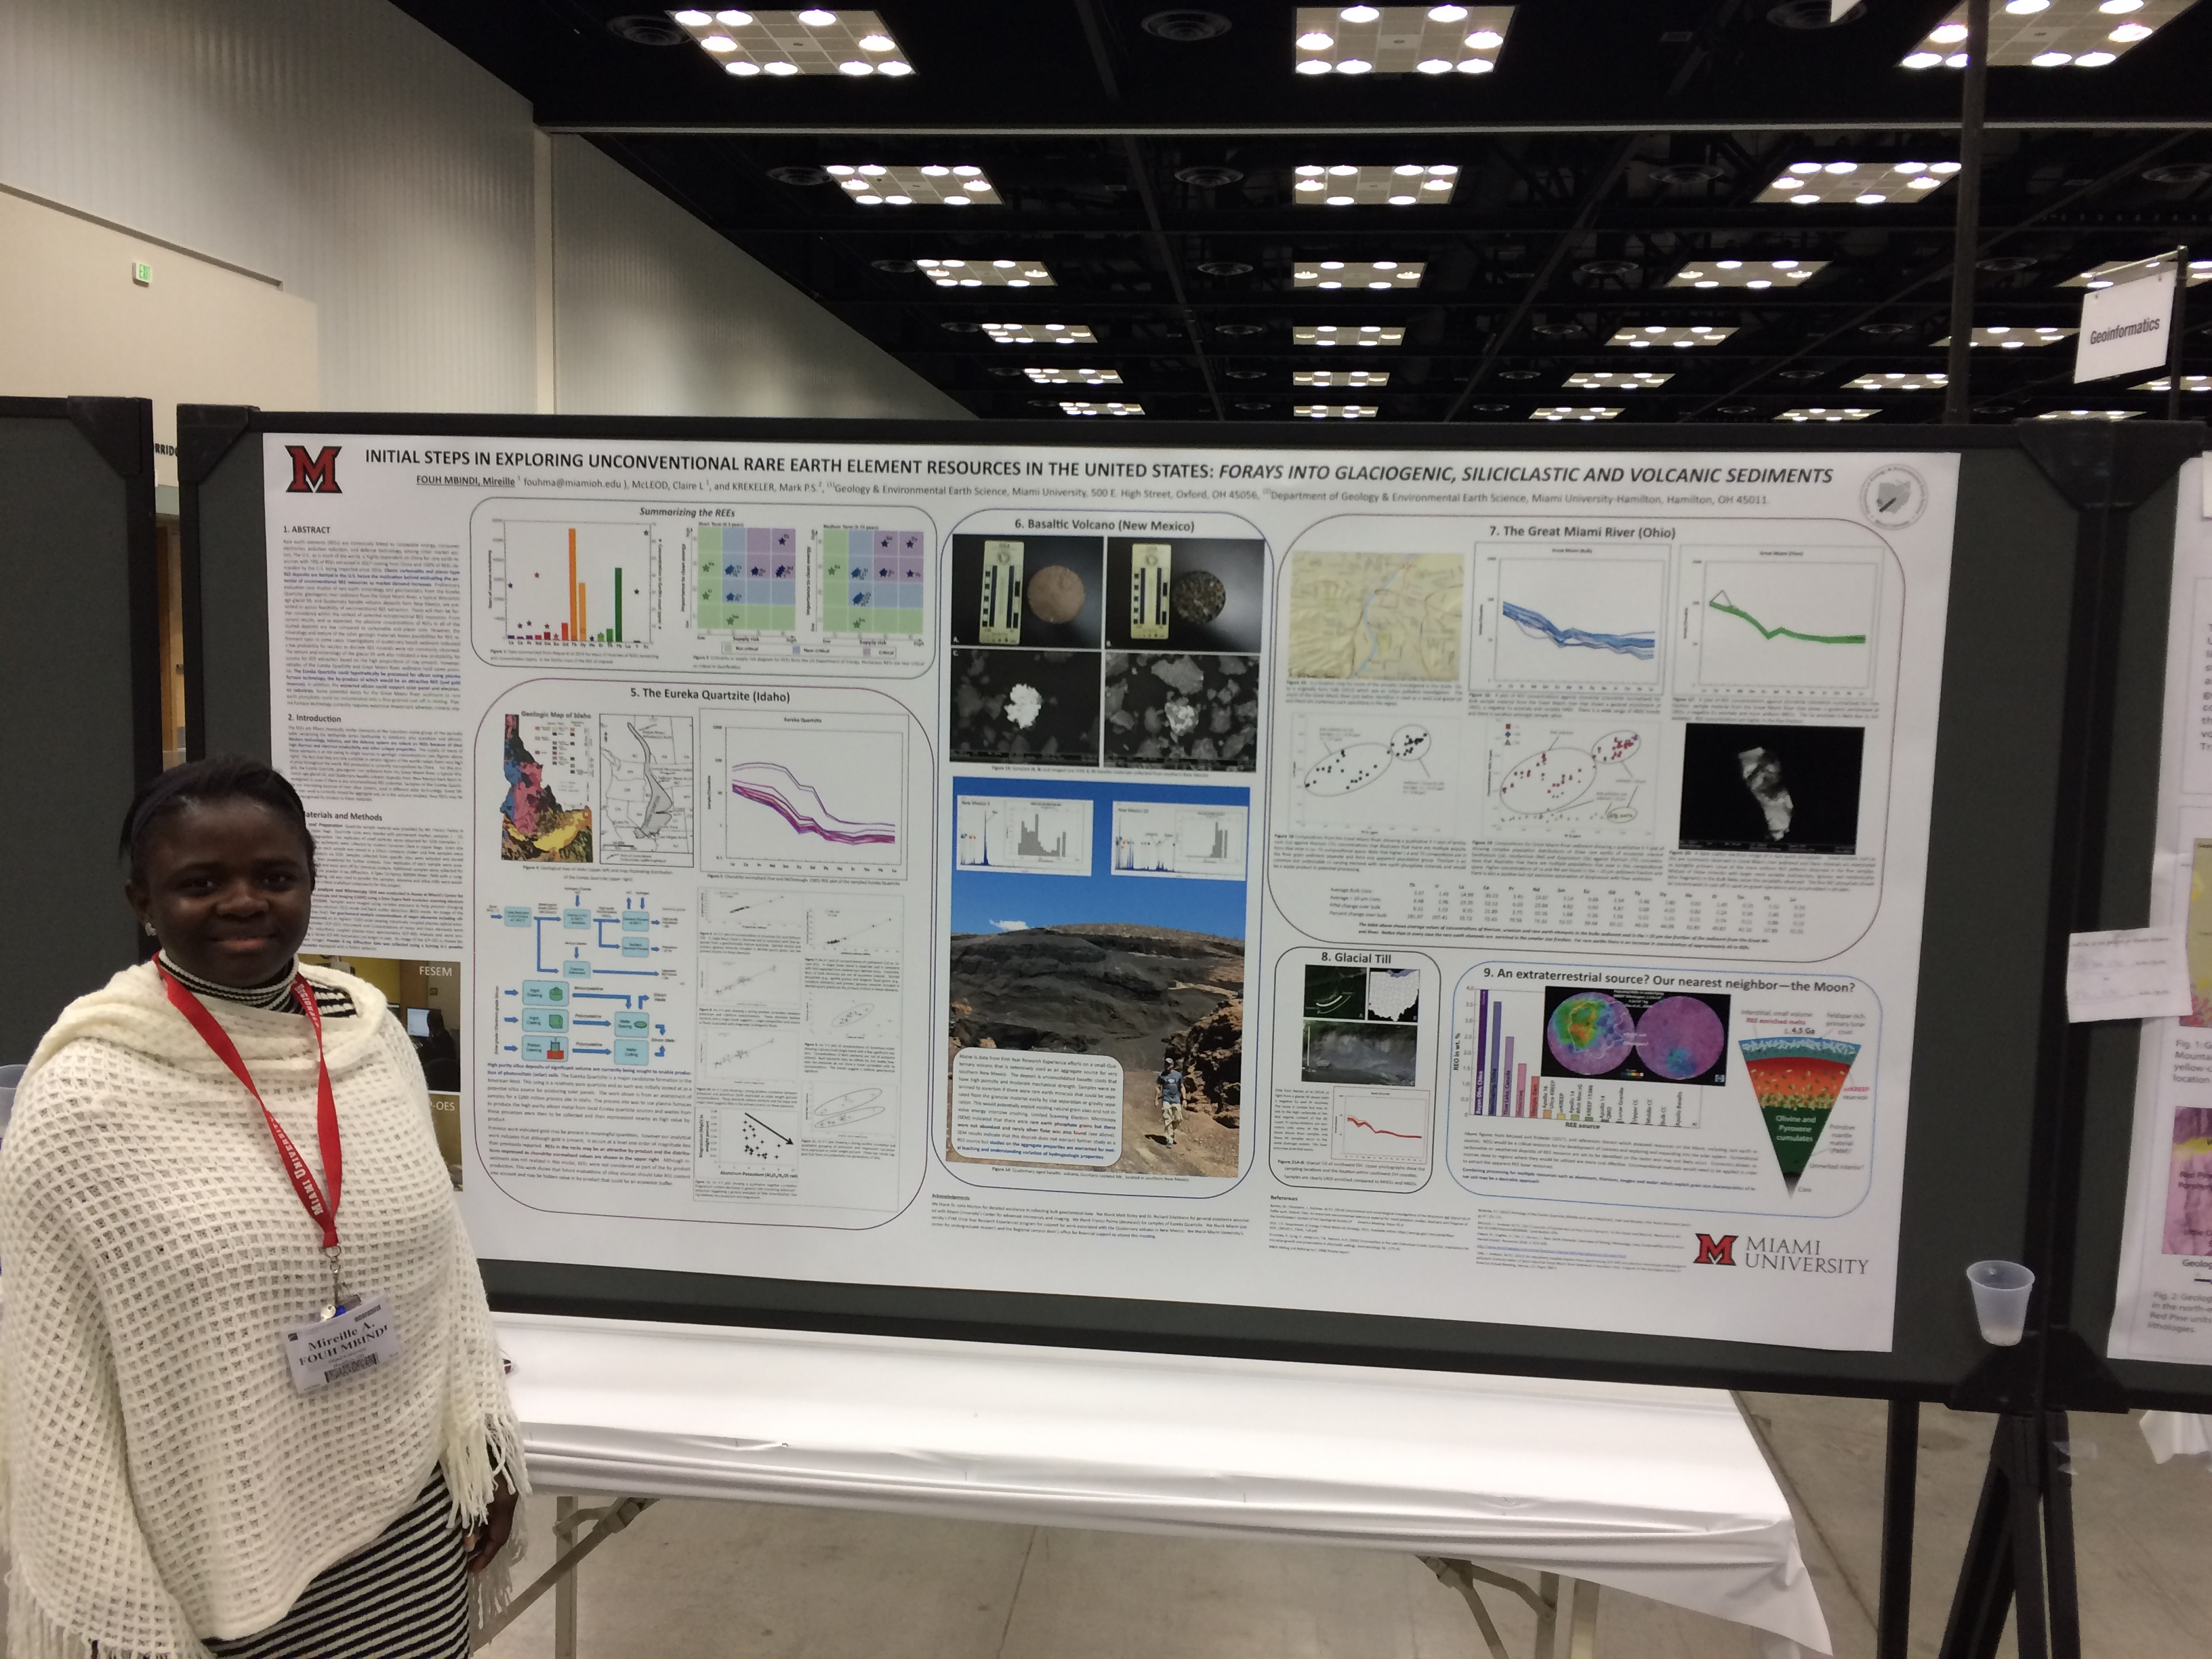 Mireille Fouh Mbindi is presenting her  project on unconventional rare earth element resources at the Geological Society of America meeting.